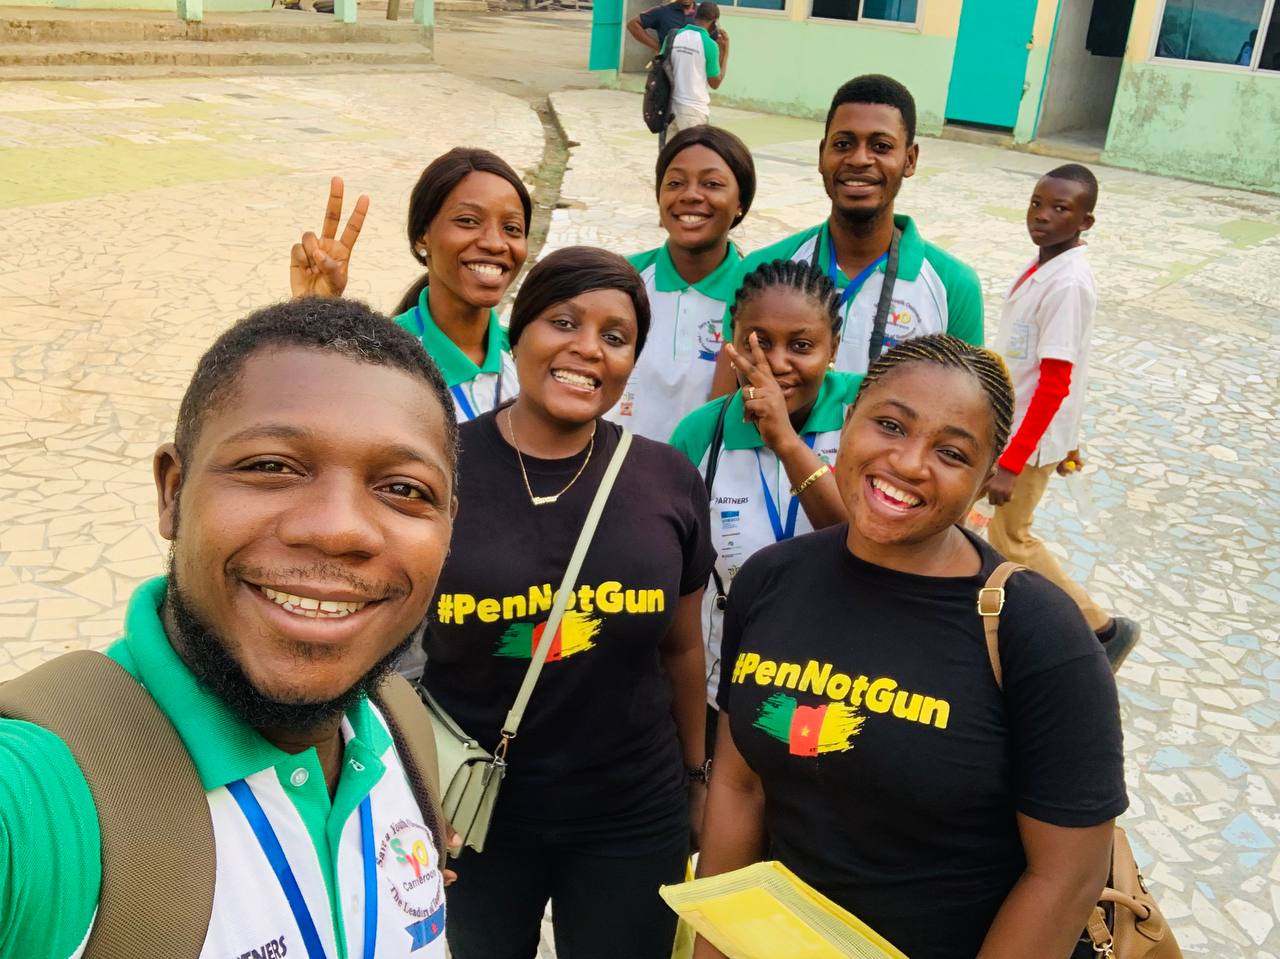 Joyful group of people taking a selfie with matching outfits with the word "#PenNotGun" written on them